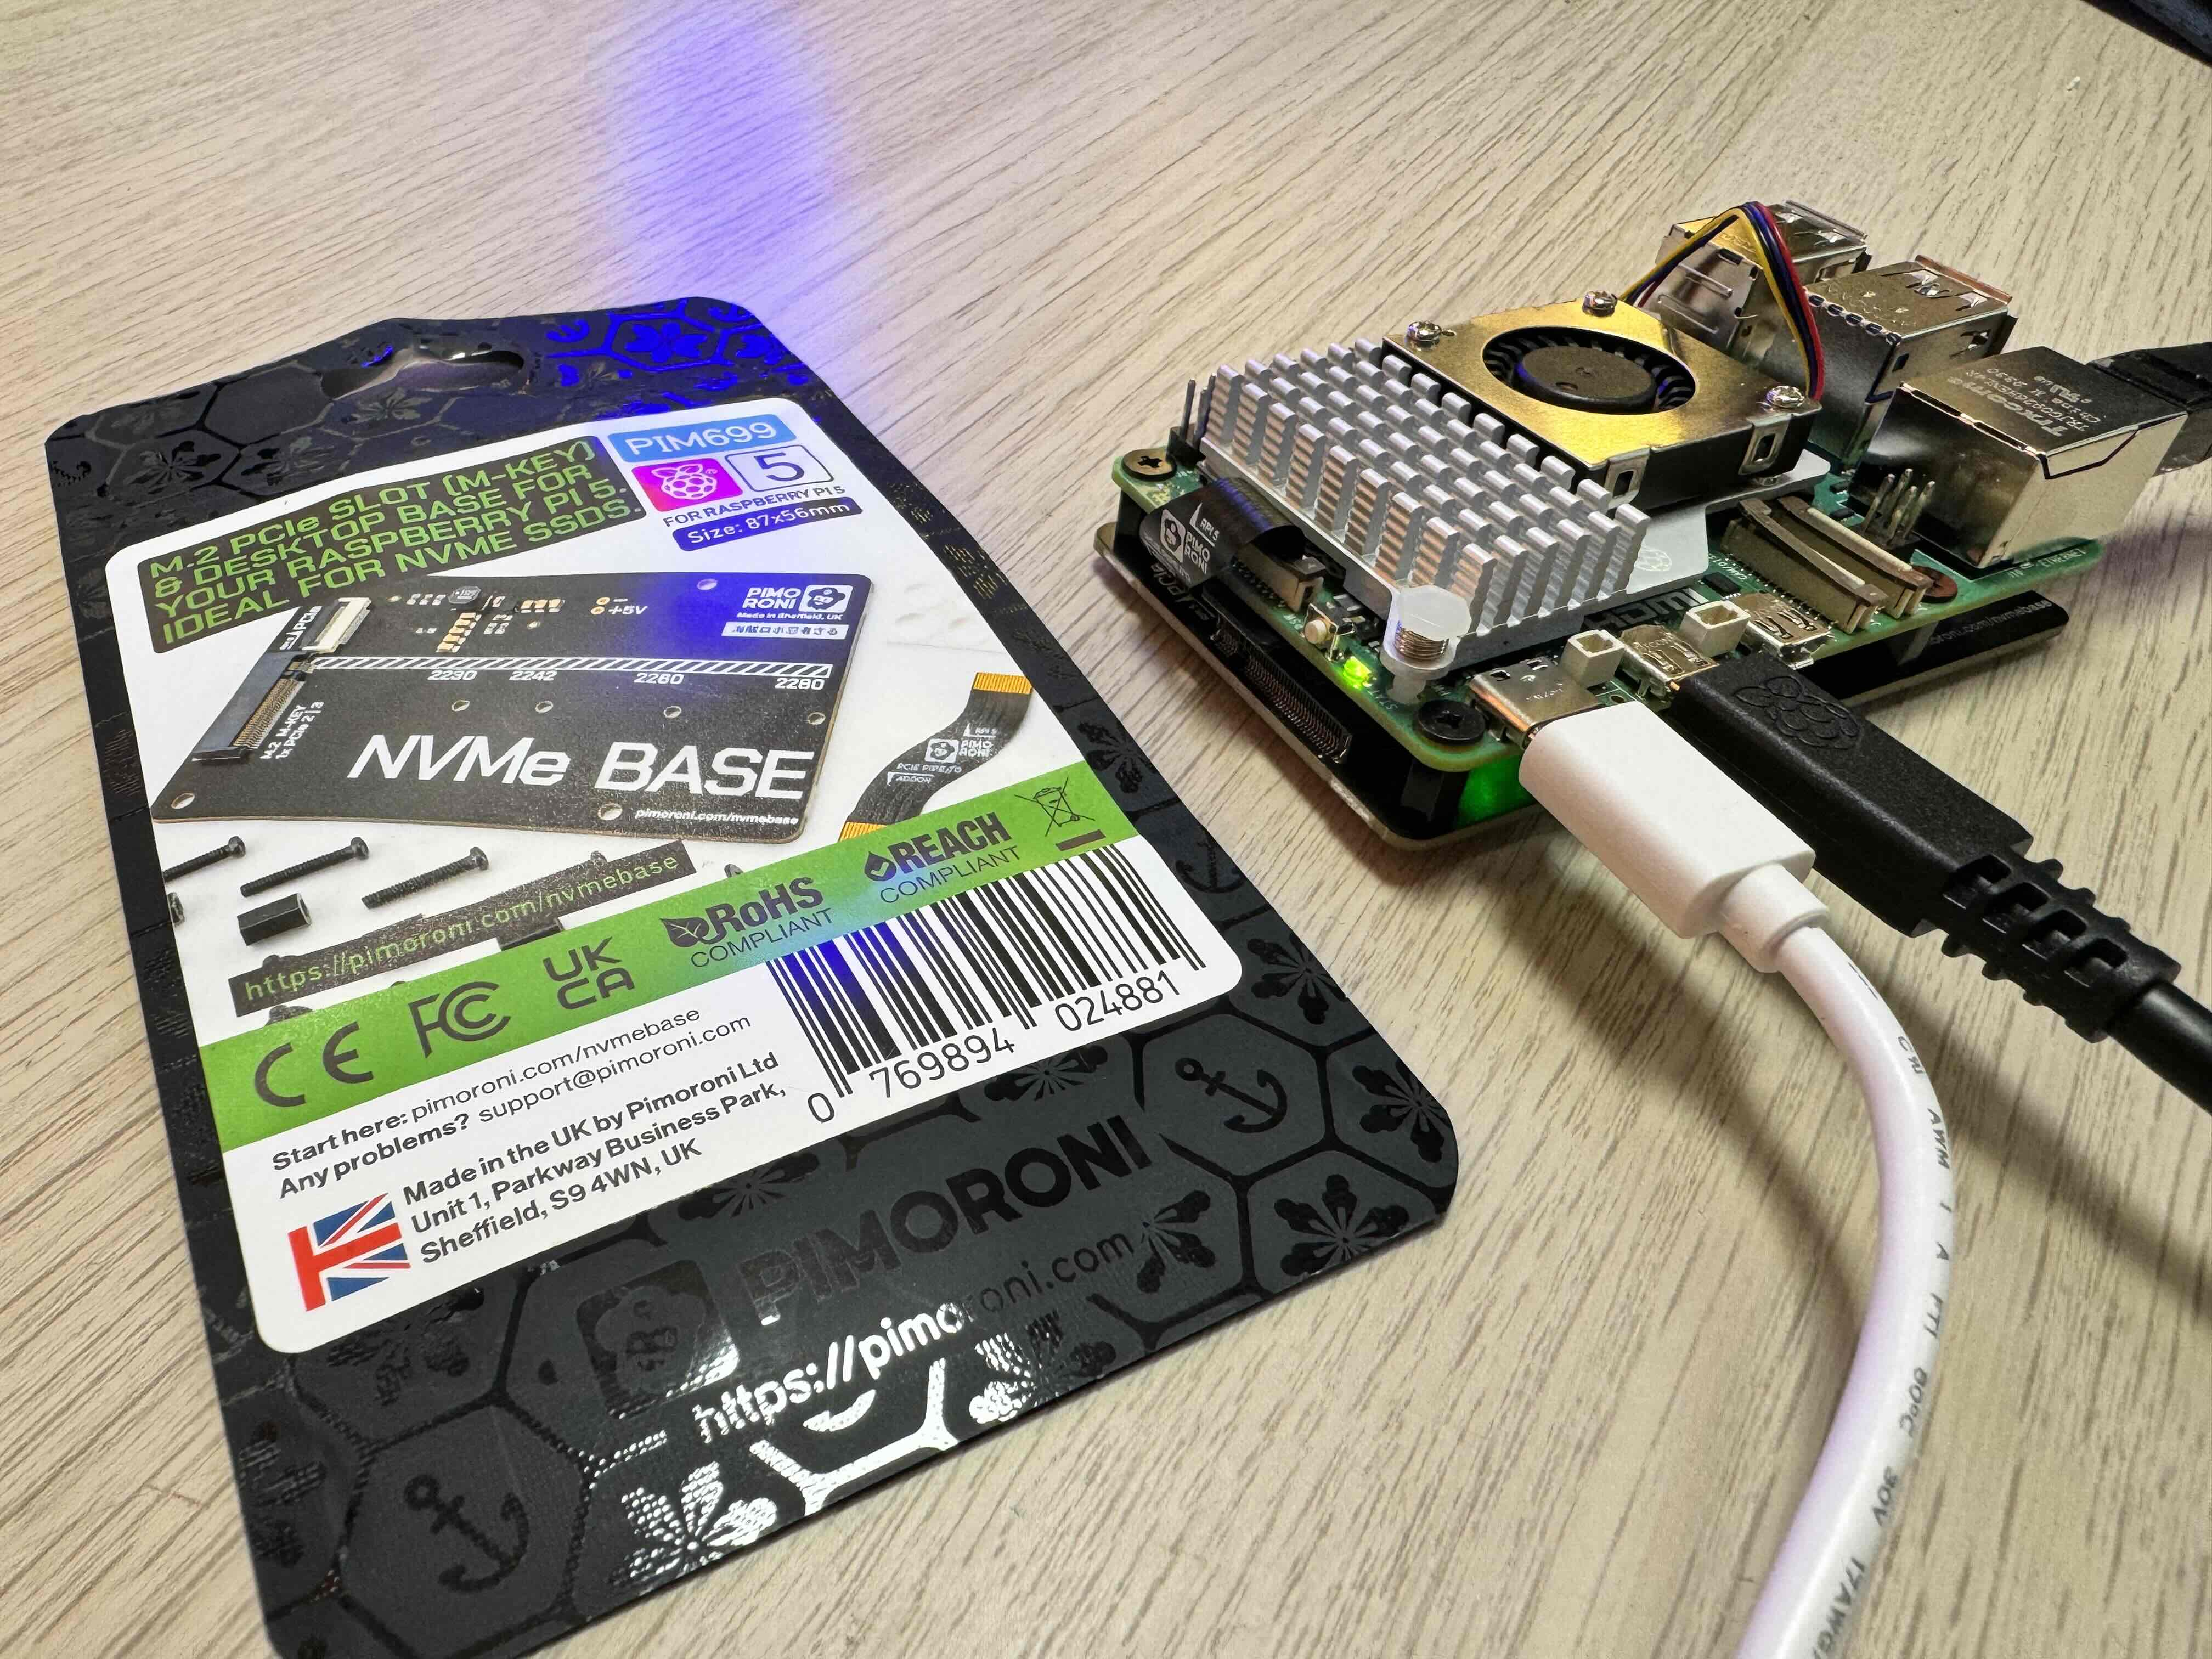 Page cover image for Pimoroni NVMe Base